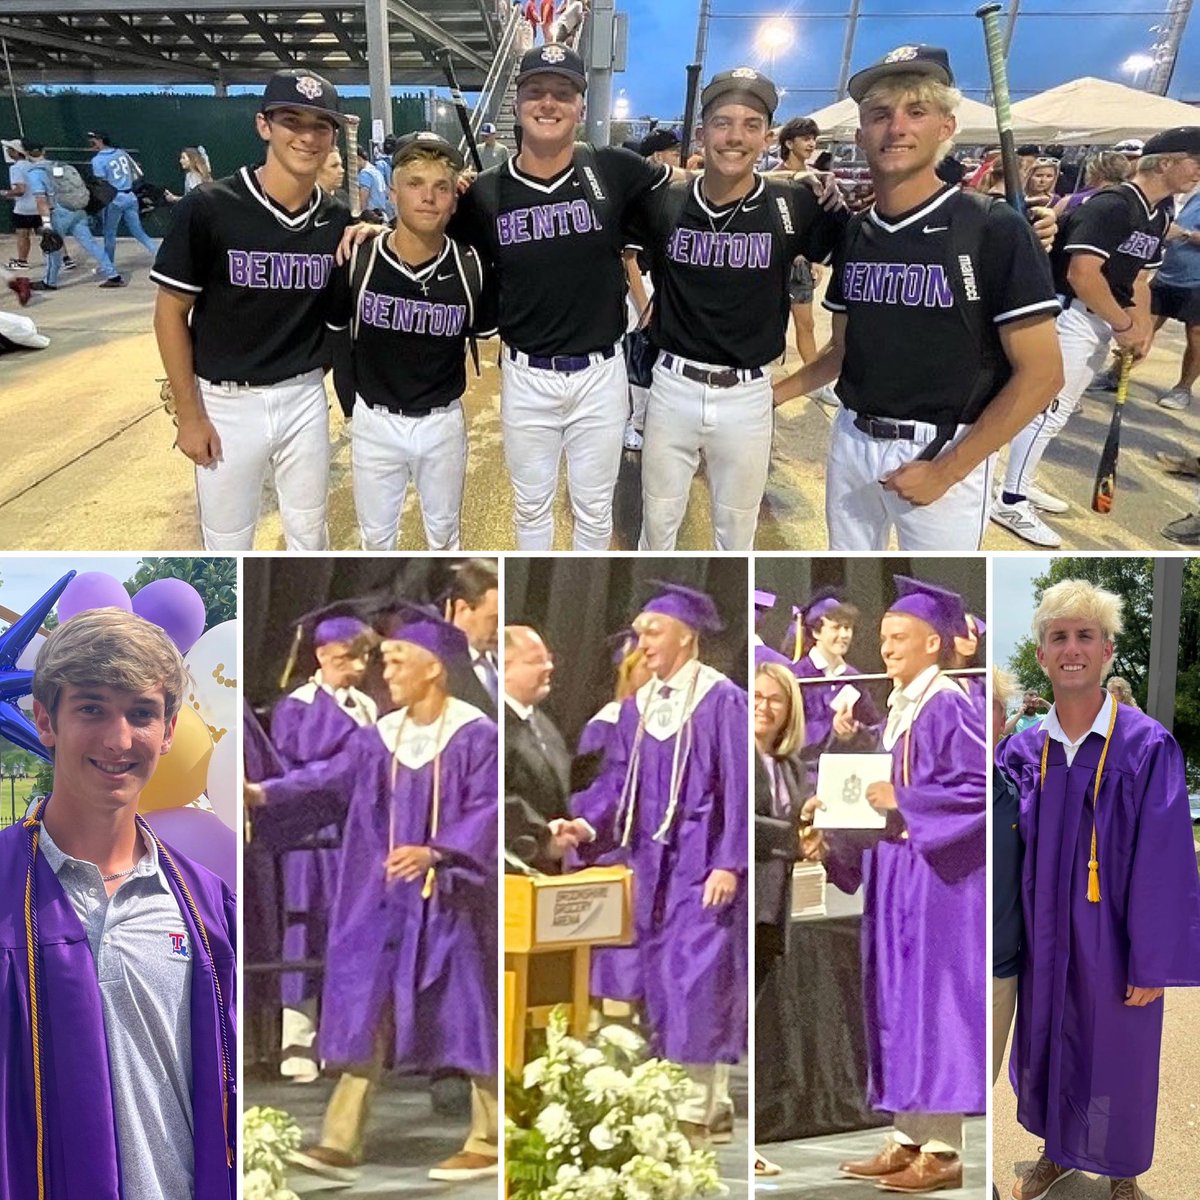 CONGRATS to our 5 #BentonTigers seniors on graduating on Saturday. Thank you Brooks Prewitt, Hudson Brignac, Cody Wilhite, Blake Warner & Bryson Pierce for your dedication, leadership, love of the game & everything you left on the field for the Benton Tigers. #GoTigers